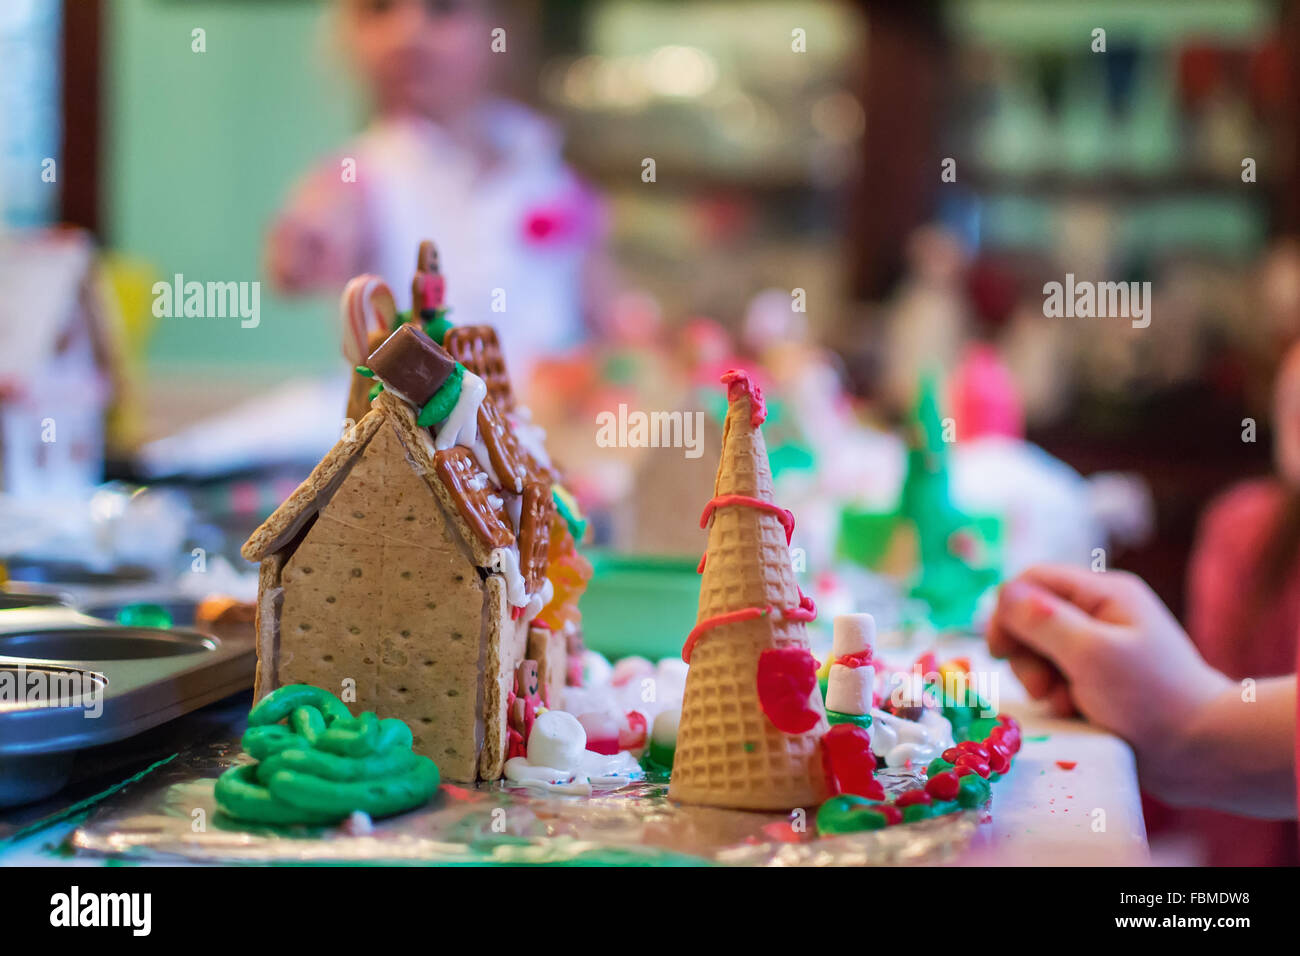 Children decorating gingerbread houses Stock Photo